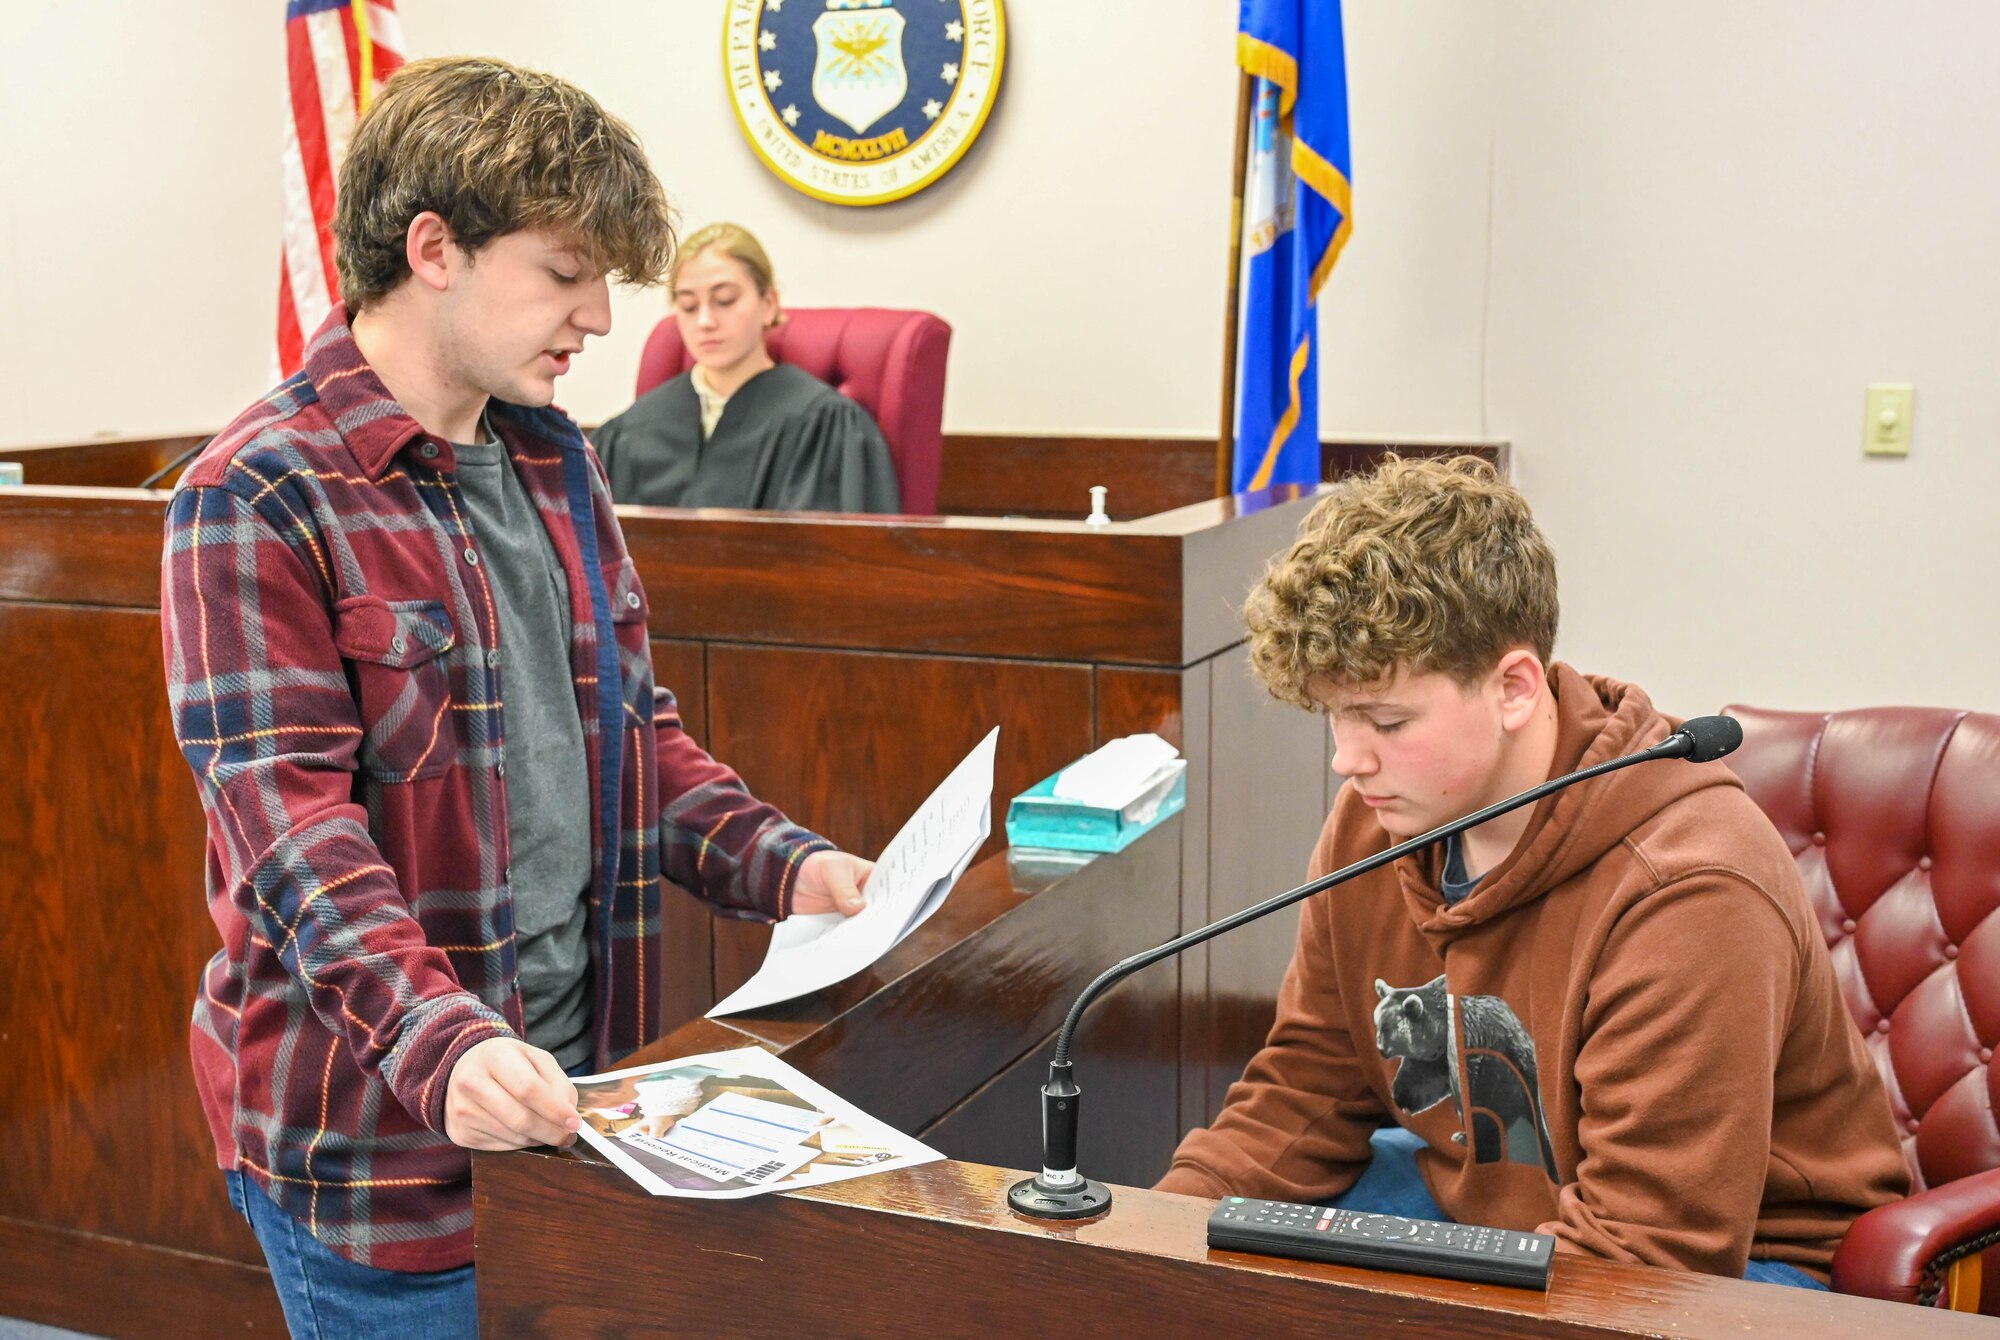 An Altus High School (AHS) student, questions another student, during a cross-examination period at a mock trial on Altus Air Force Base, Oklahoma, May 1, 2023. During the trial, students acted as the judge, plaintiff, defendant, jury and other key characters. (U.S. Air Force photo by Senior Airman Trenton Jancze)